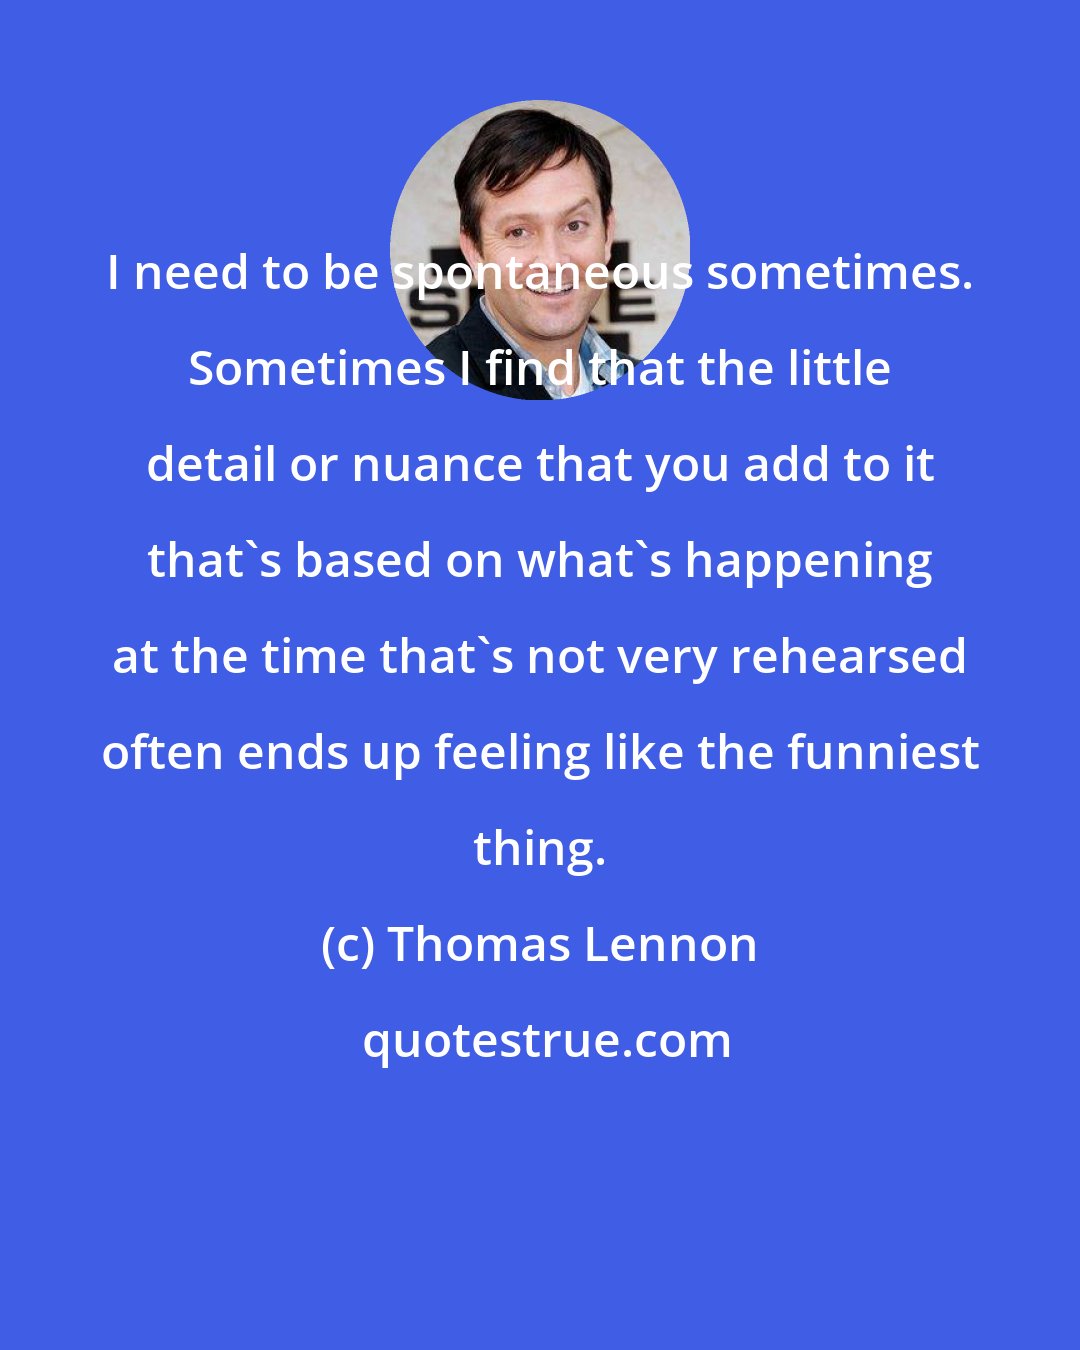 Thomas Lennon: I need to be spontaneous sometimes. Sometimes I find that the little detail or nuance that you add to it that's based on what's happening at the time that's not very rehearsed often ends up feeling like the funniest thing.